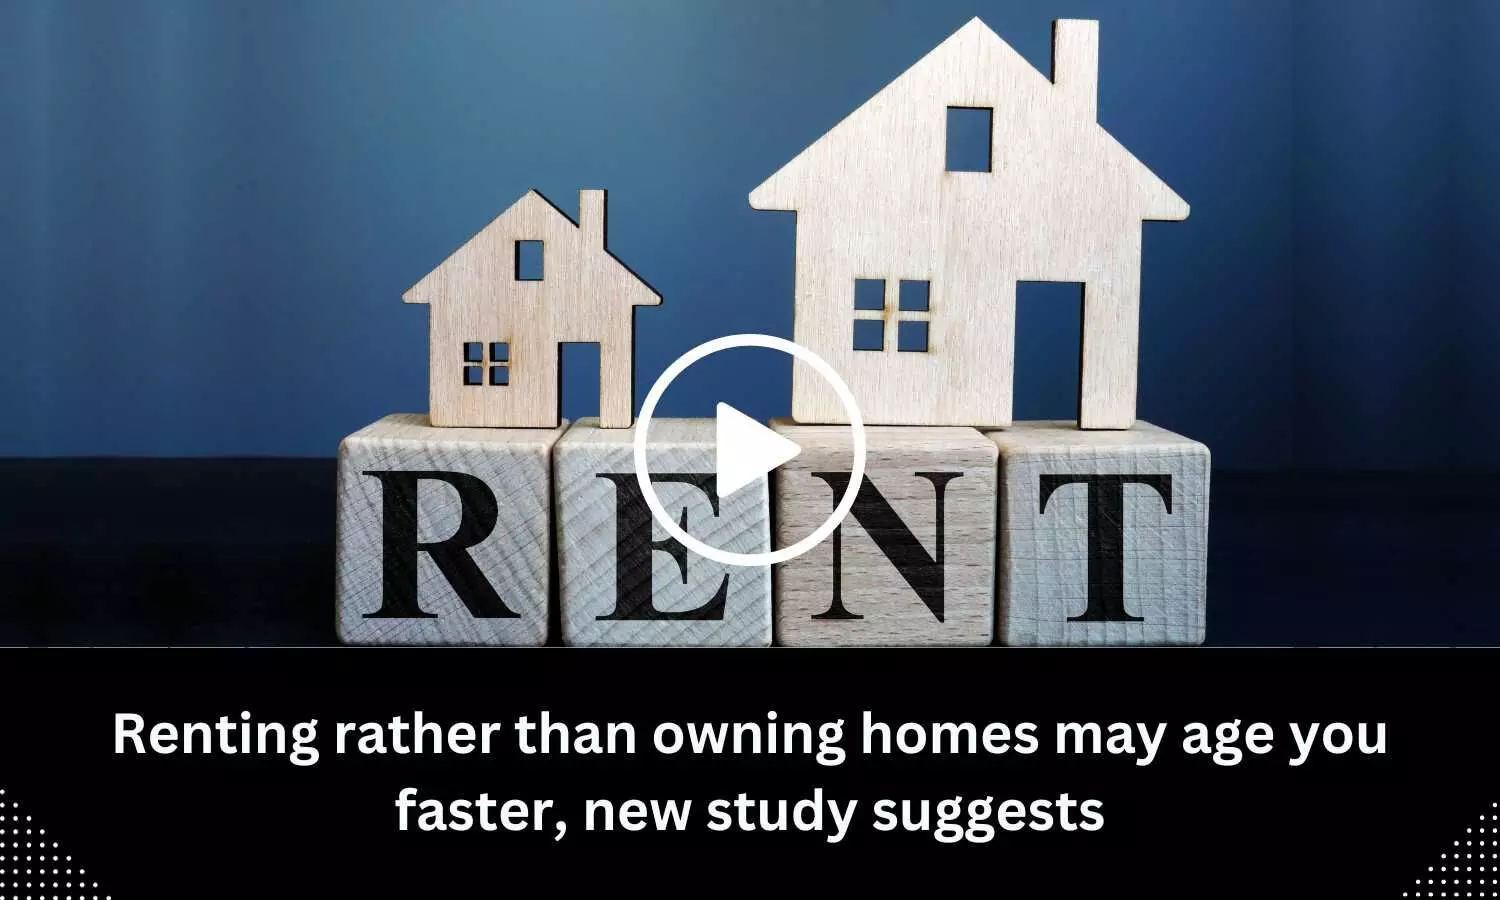 Renting rather than owning homes may age you faster, new study suggests